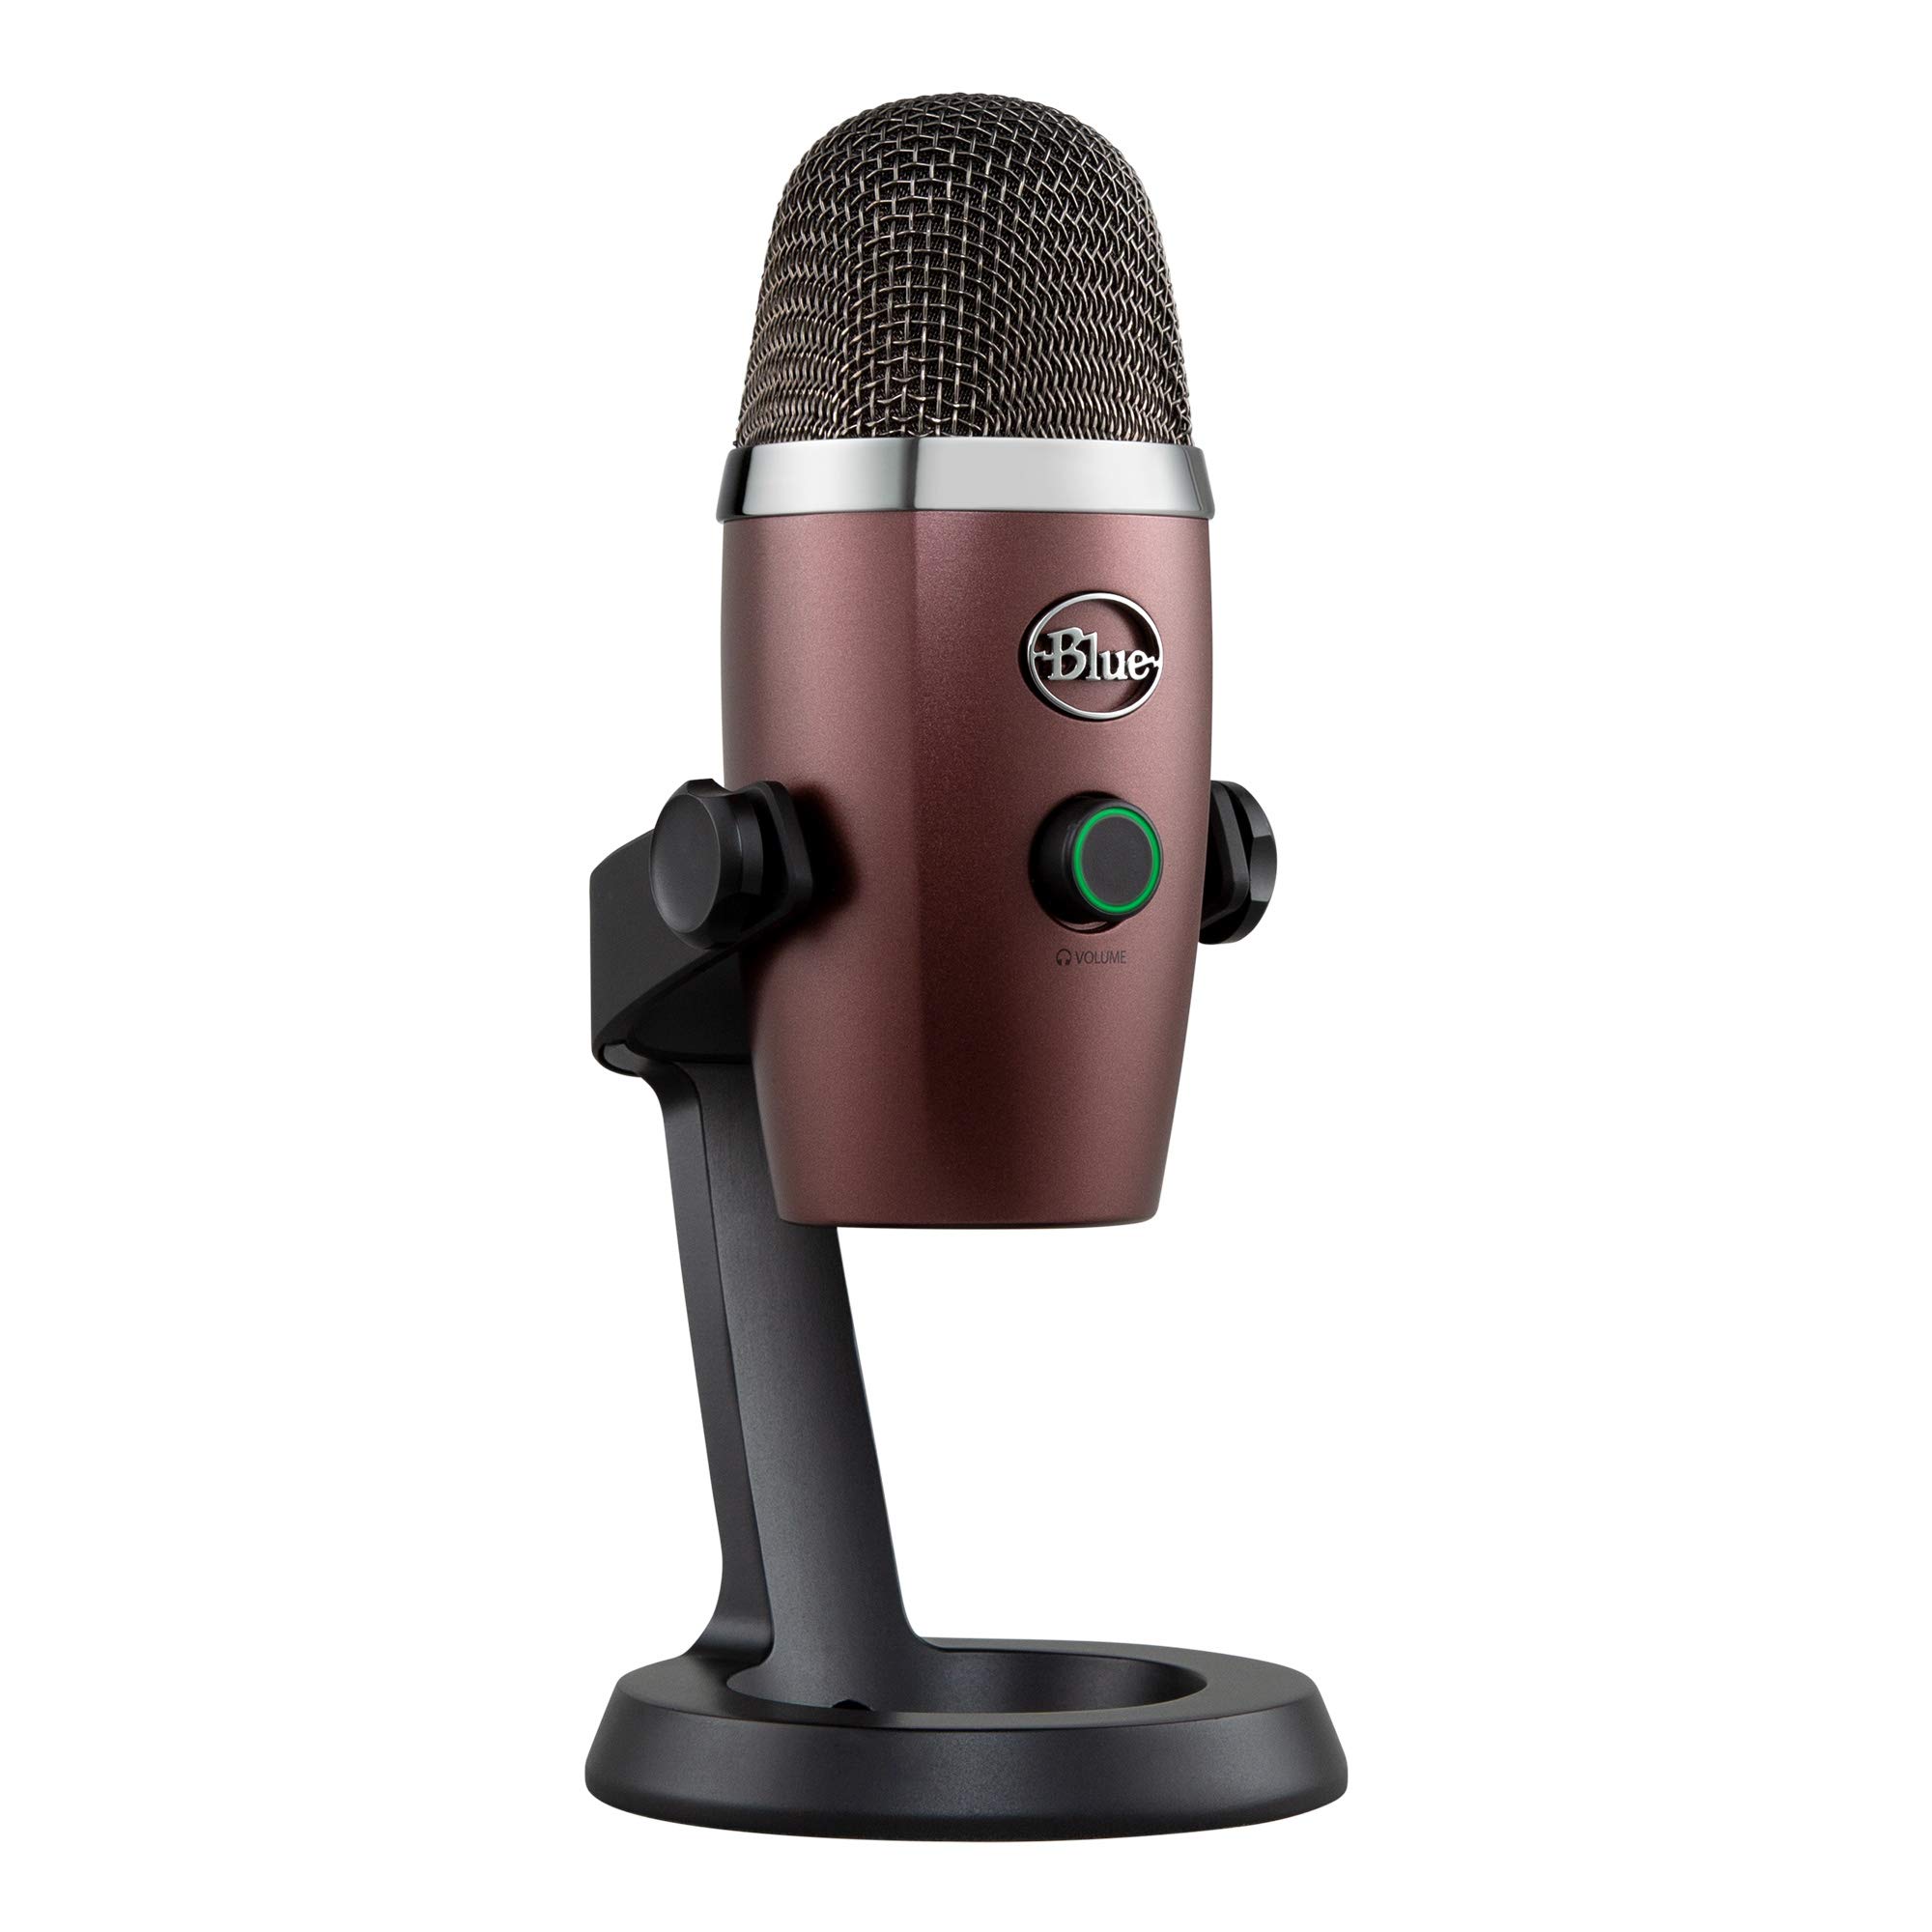 Blue Yeti microphone with a red X over it